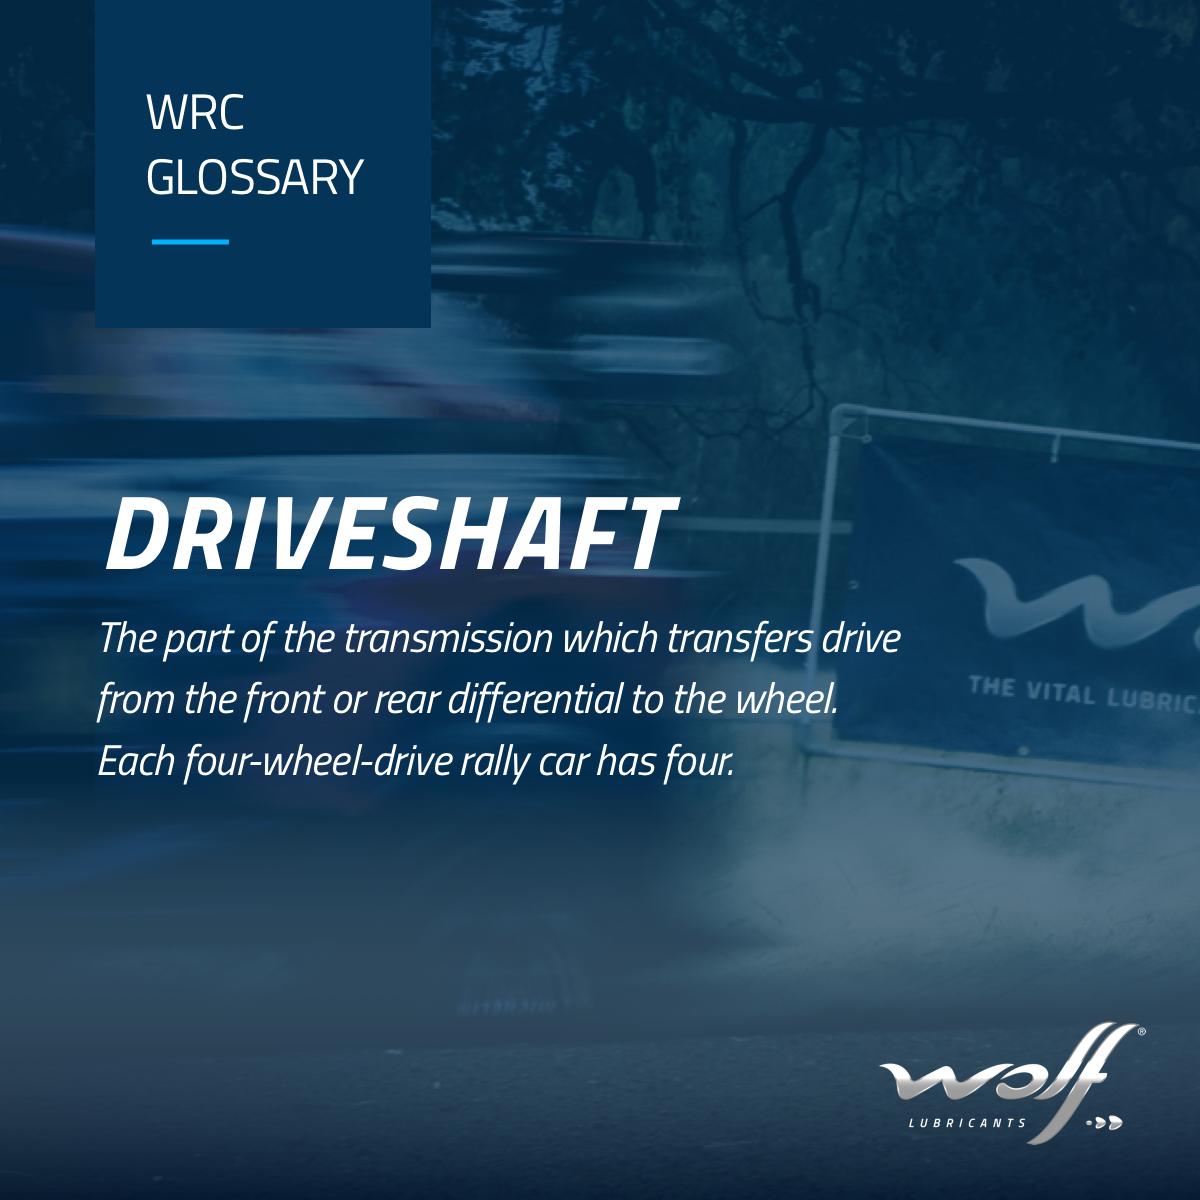 One of the most critical components, the driveshaft helps @OfficialWRC drivers harness the power of their vehicle and make those dramatic turns. #WolfLubes #TheVitalLubricant #WRC #WRCglossary